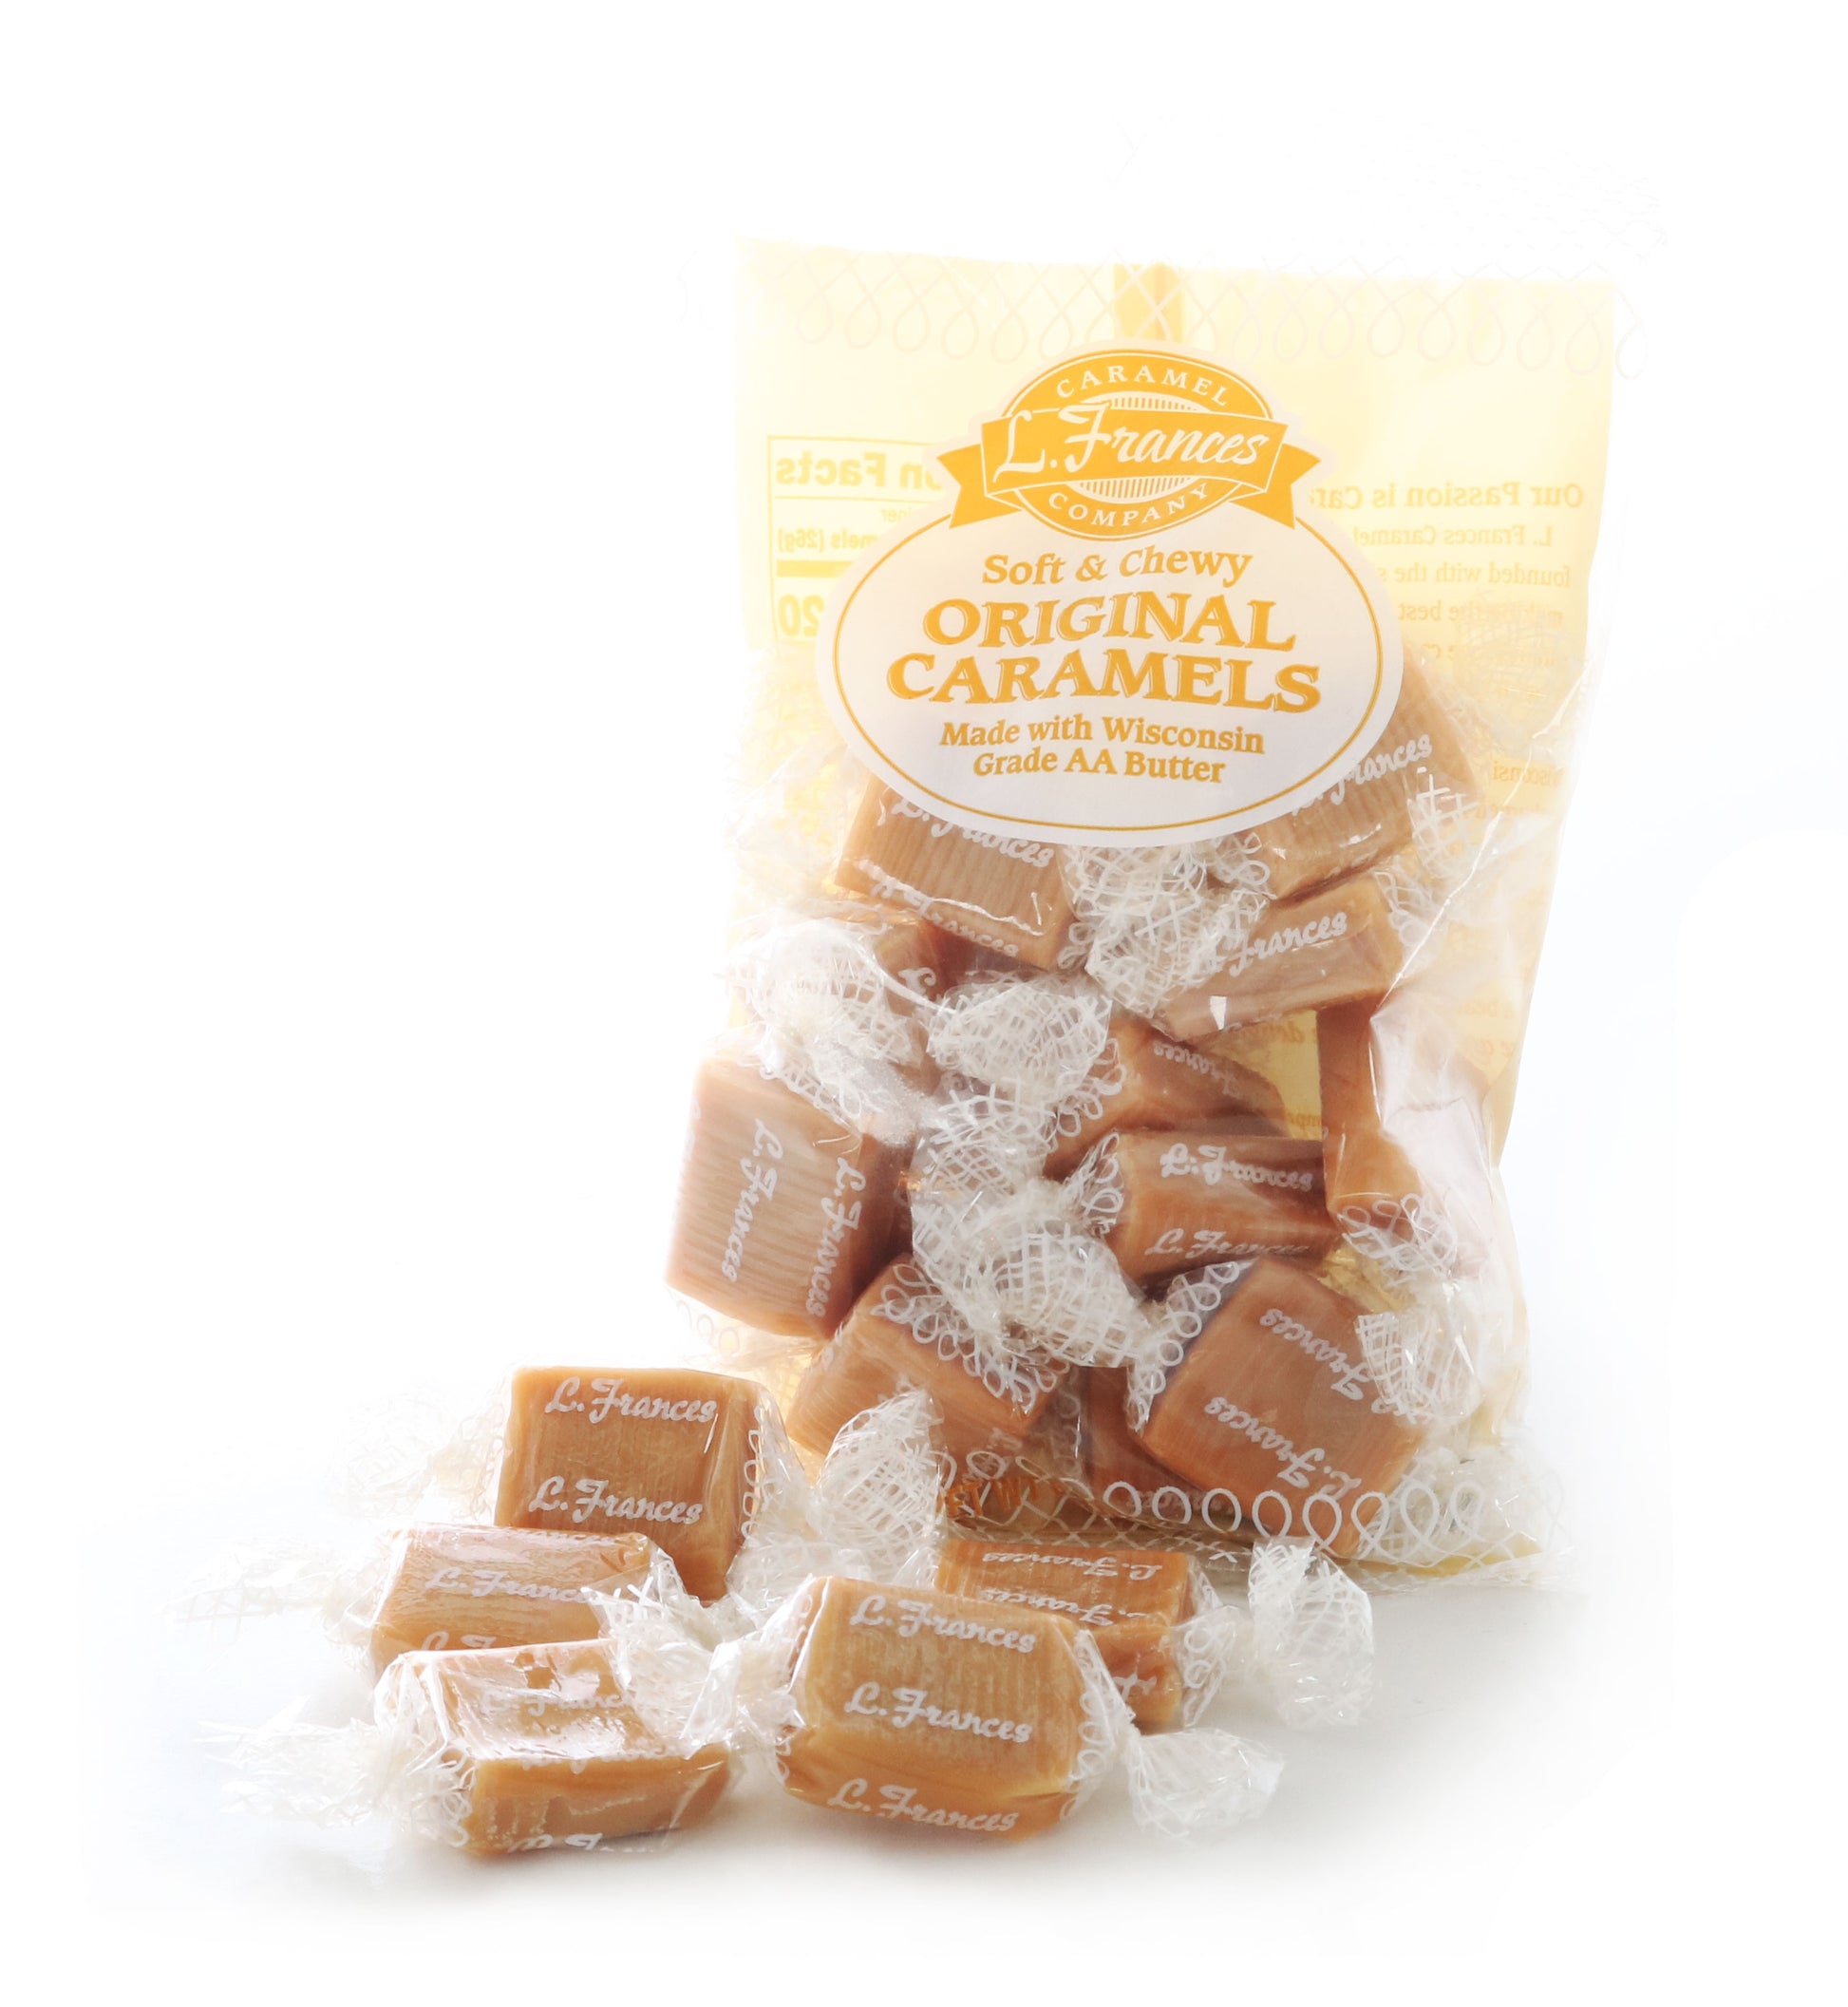 Bag of caramel candies made with Wisconsin butter